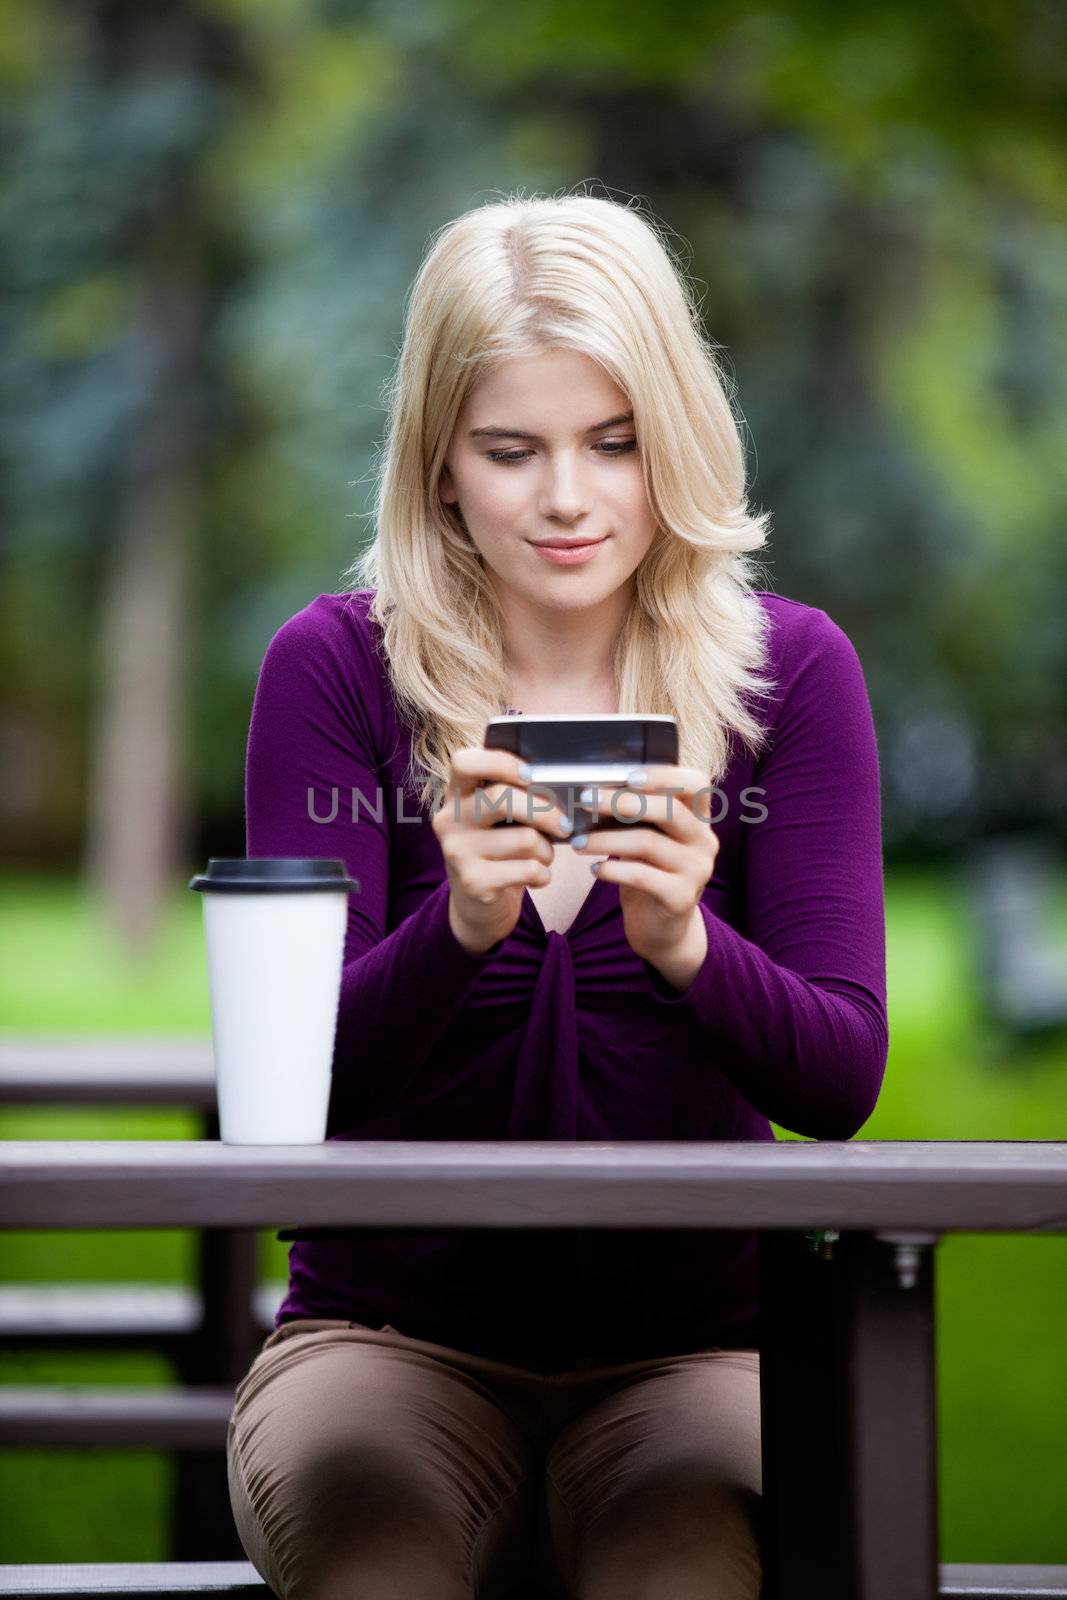 Woman in Park using Cell Phone by leaf